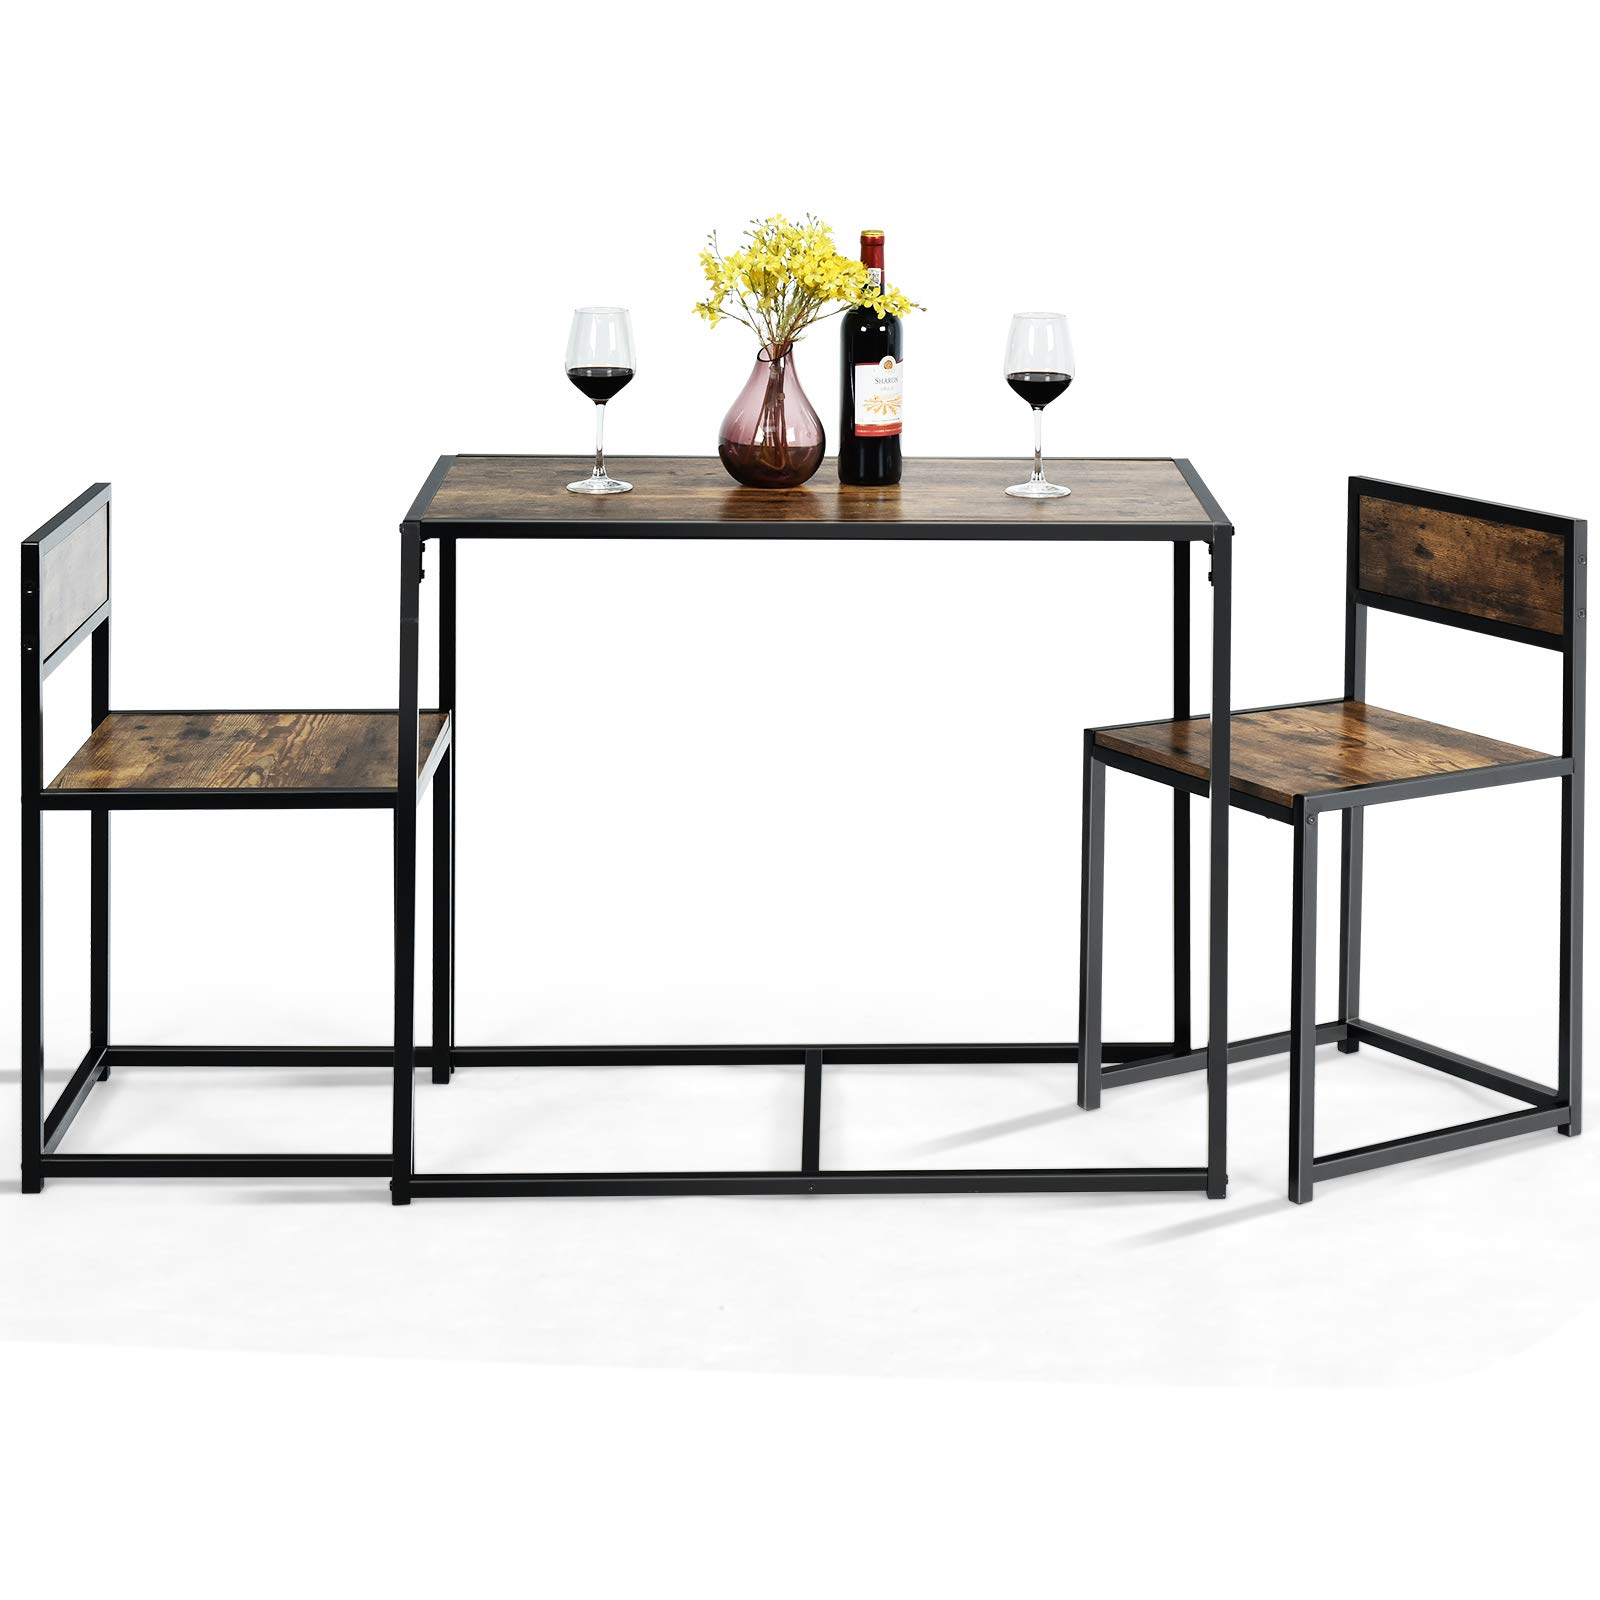 3 Piece Dining Set, Industrial Dining Table with 2 Chairs